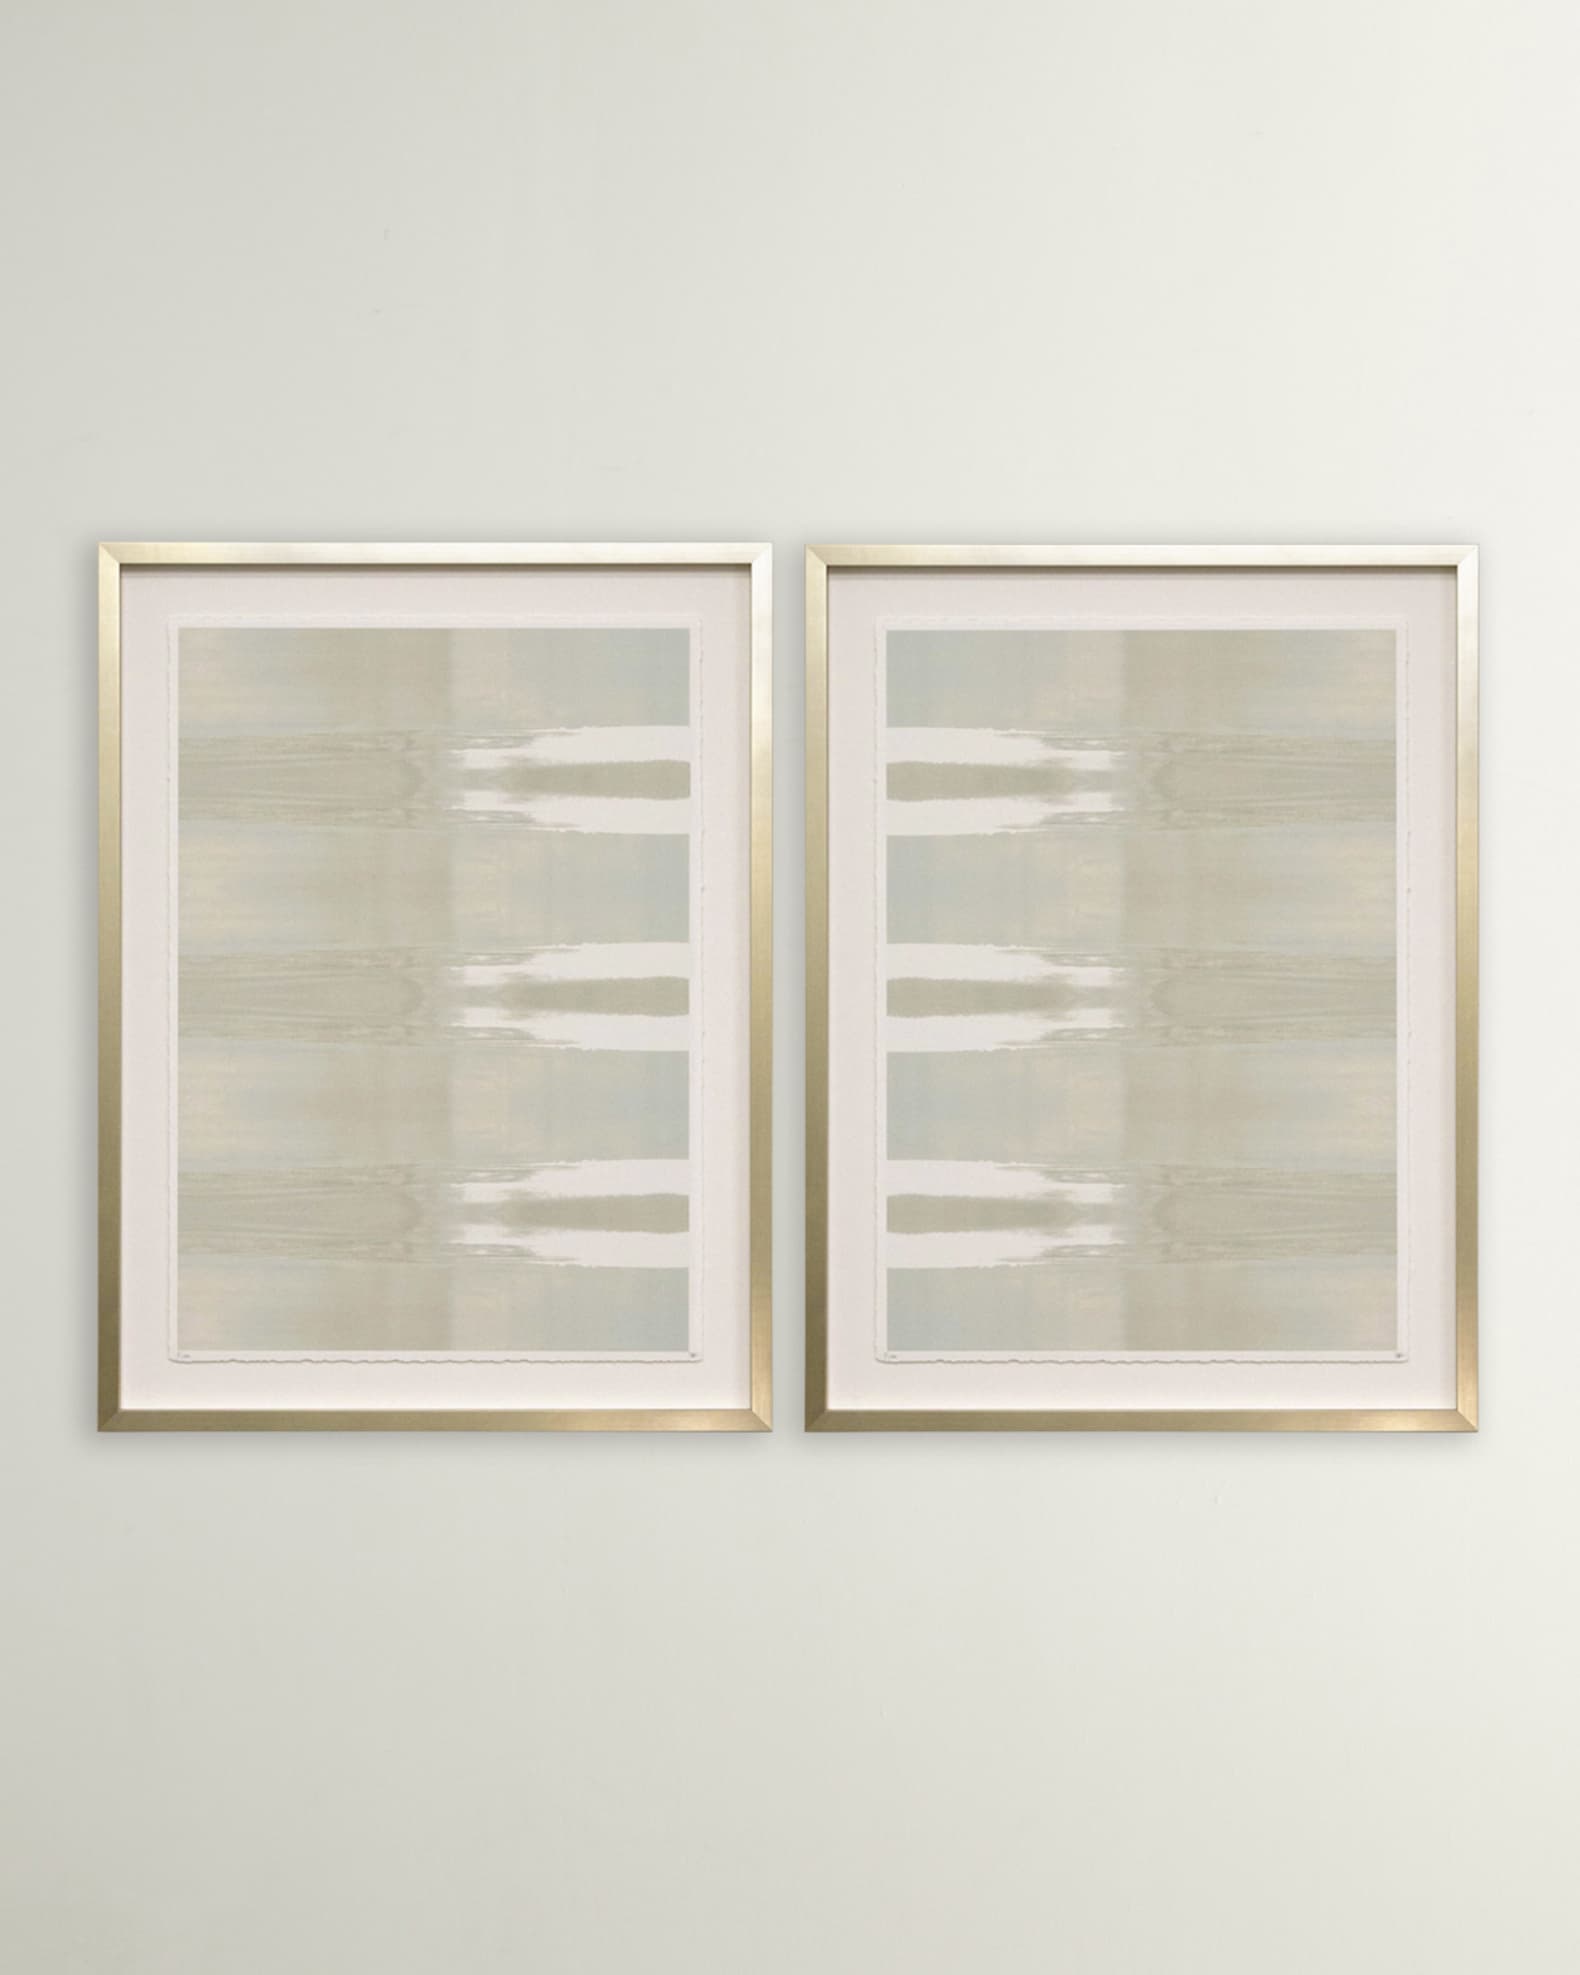 Benson-Cobb Studios Limited Edition Carol Benson Cobb Dusk In Pastel - Set Of 2 Framed Wall Art, Initialed And Numbered